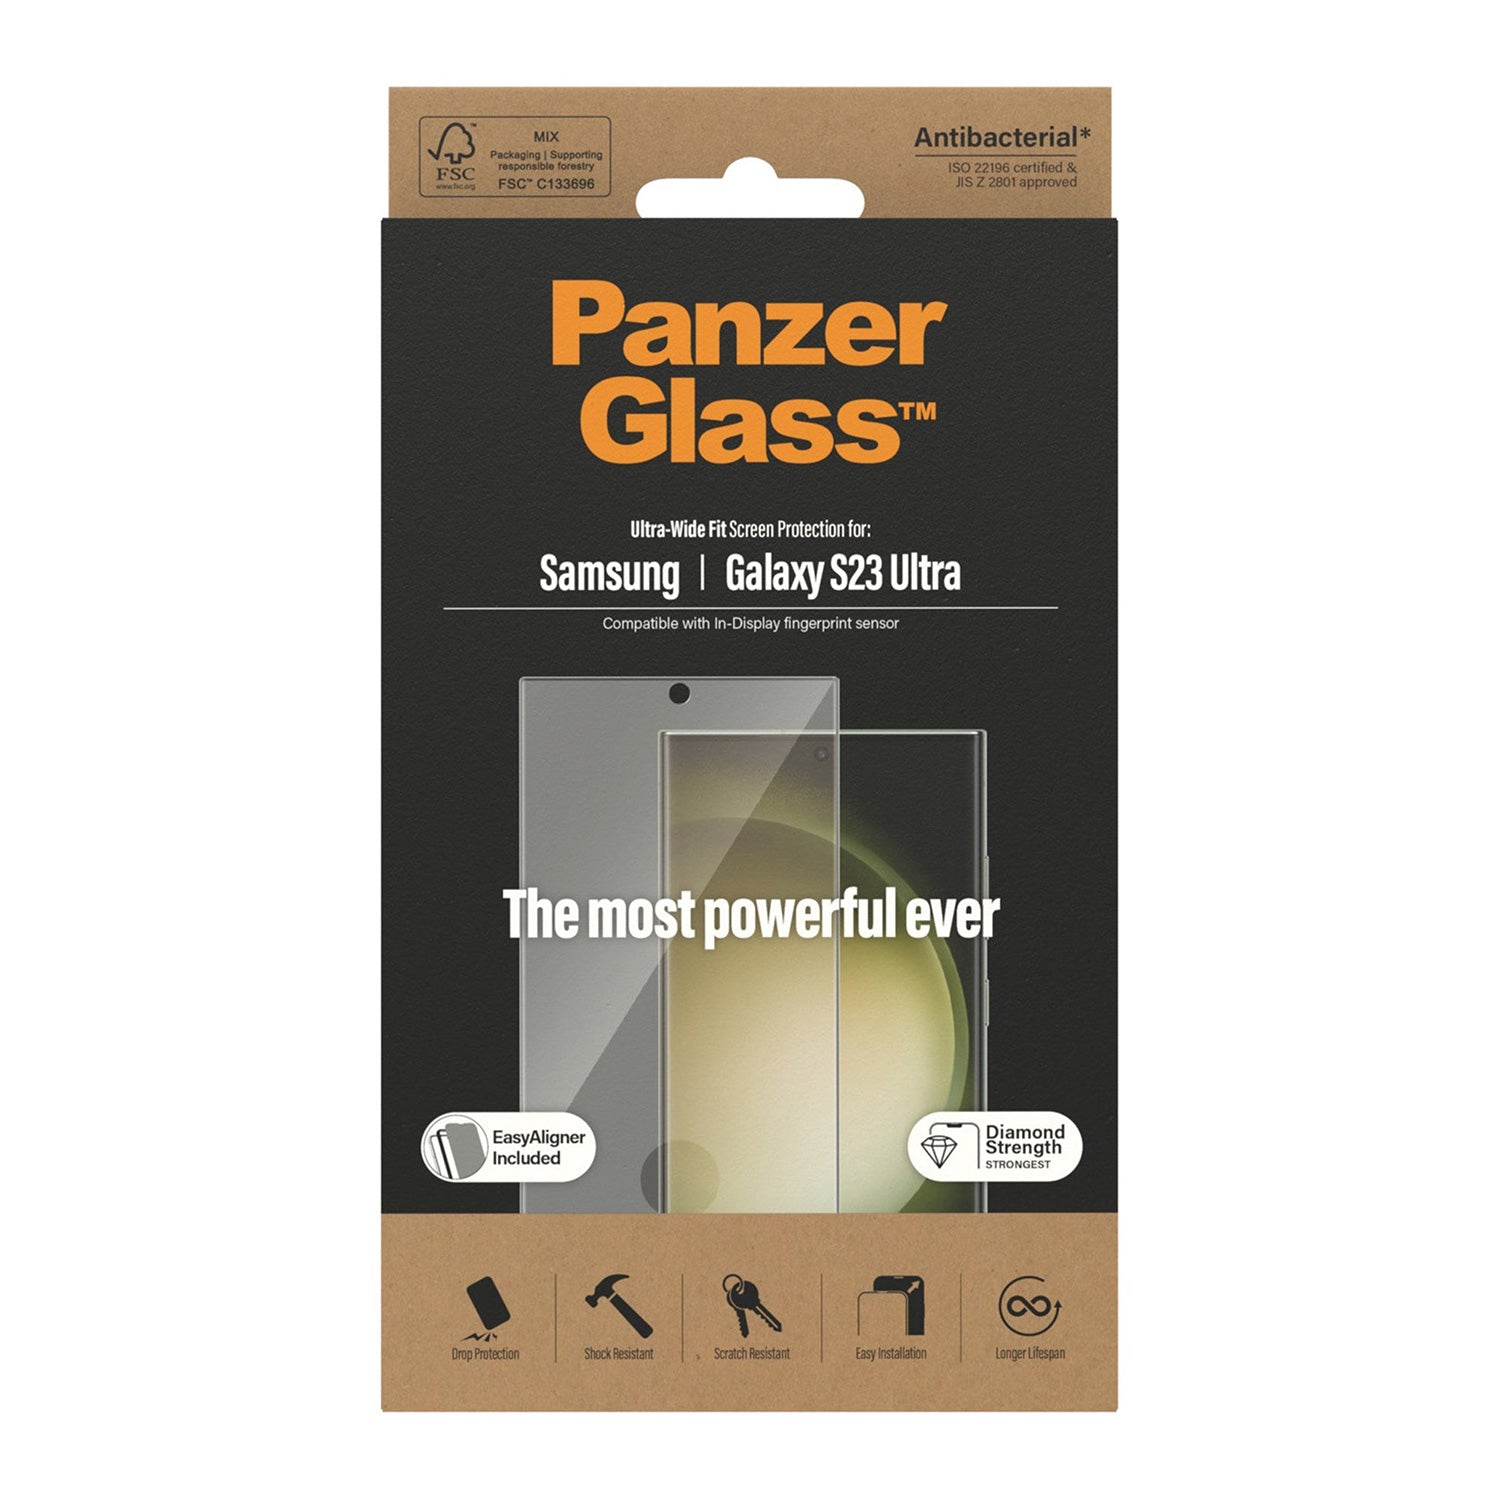 PanzerGlass Samsung Galaxy S23 Ultra Screen Protector Ultra-Wide Fit Antibacterial with Aligner